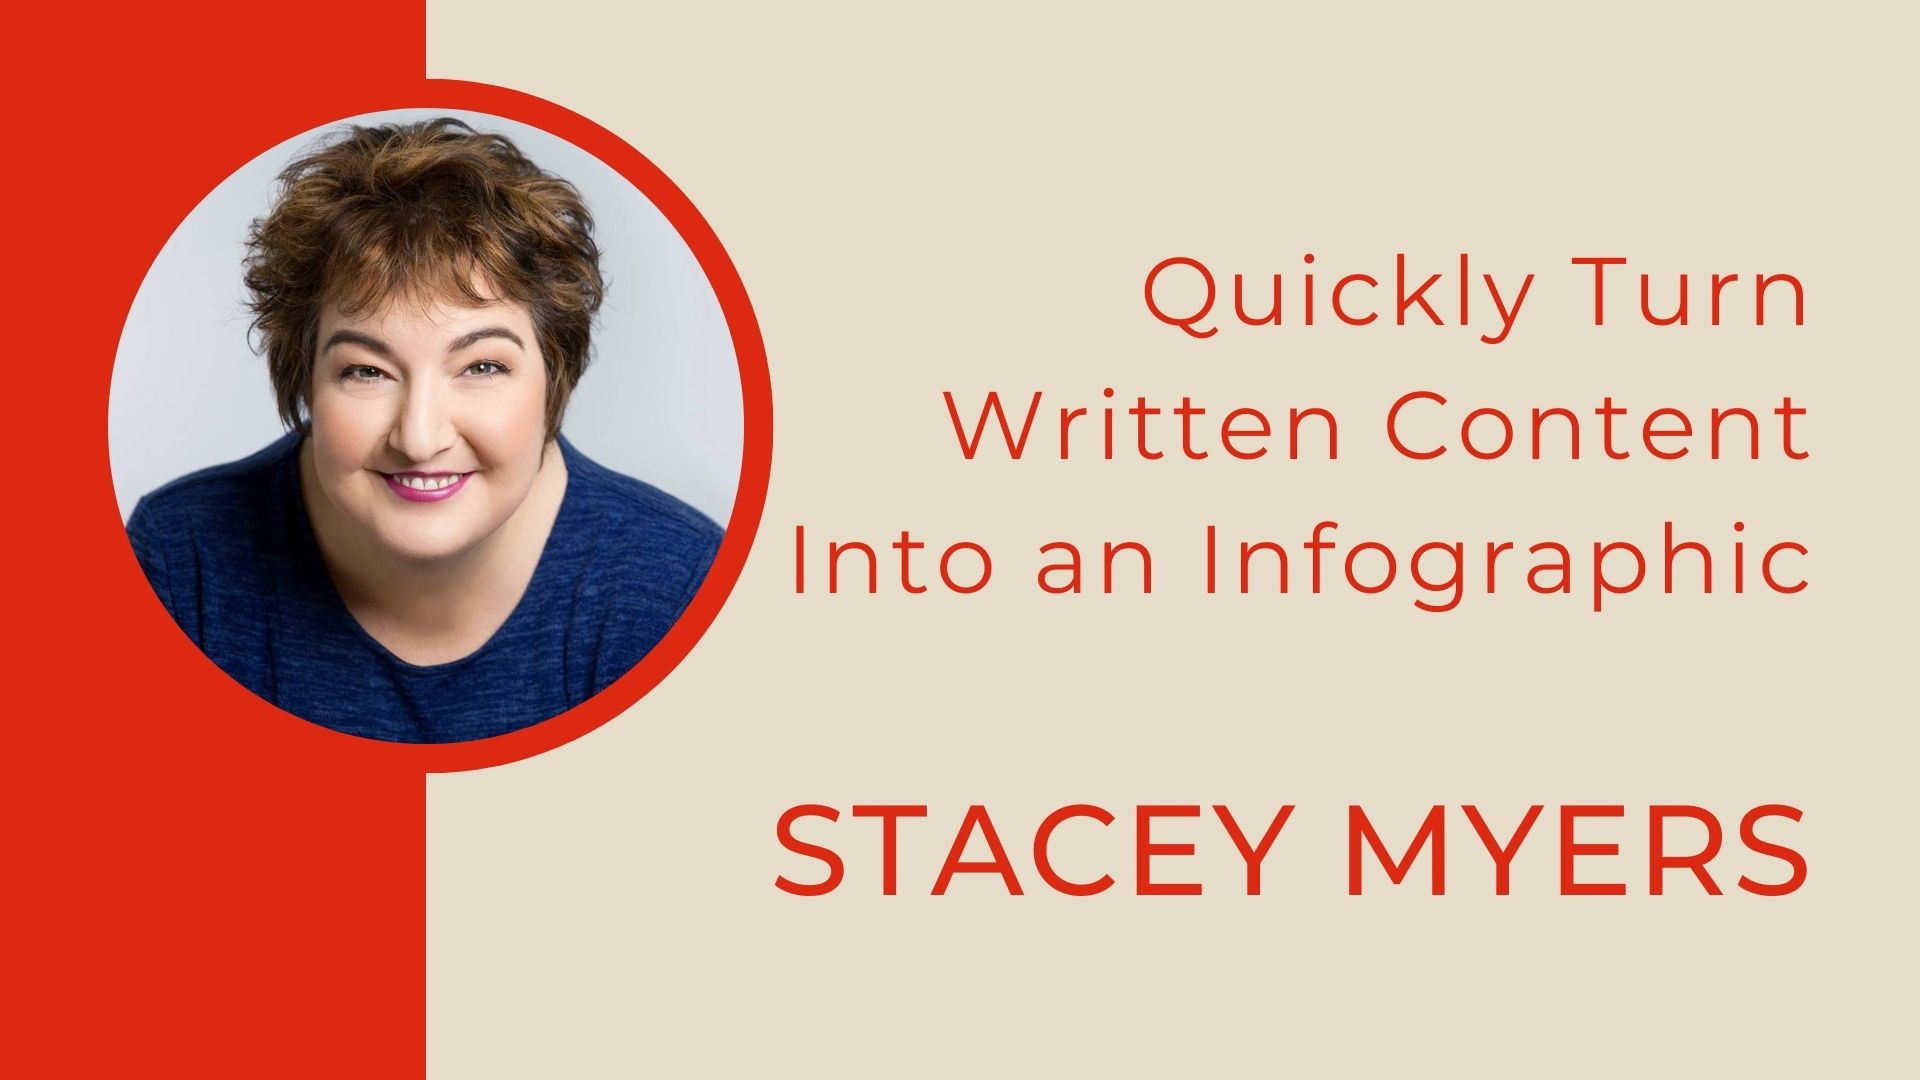 Stacey Myers written content into infographics